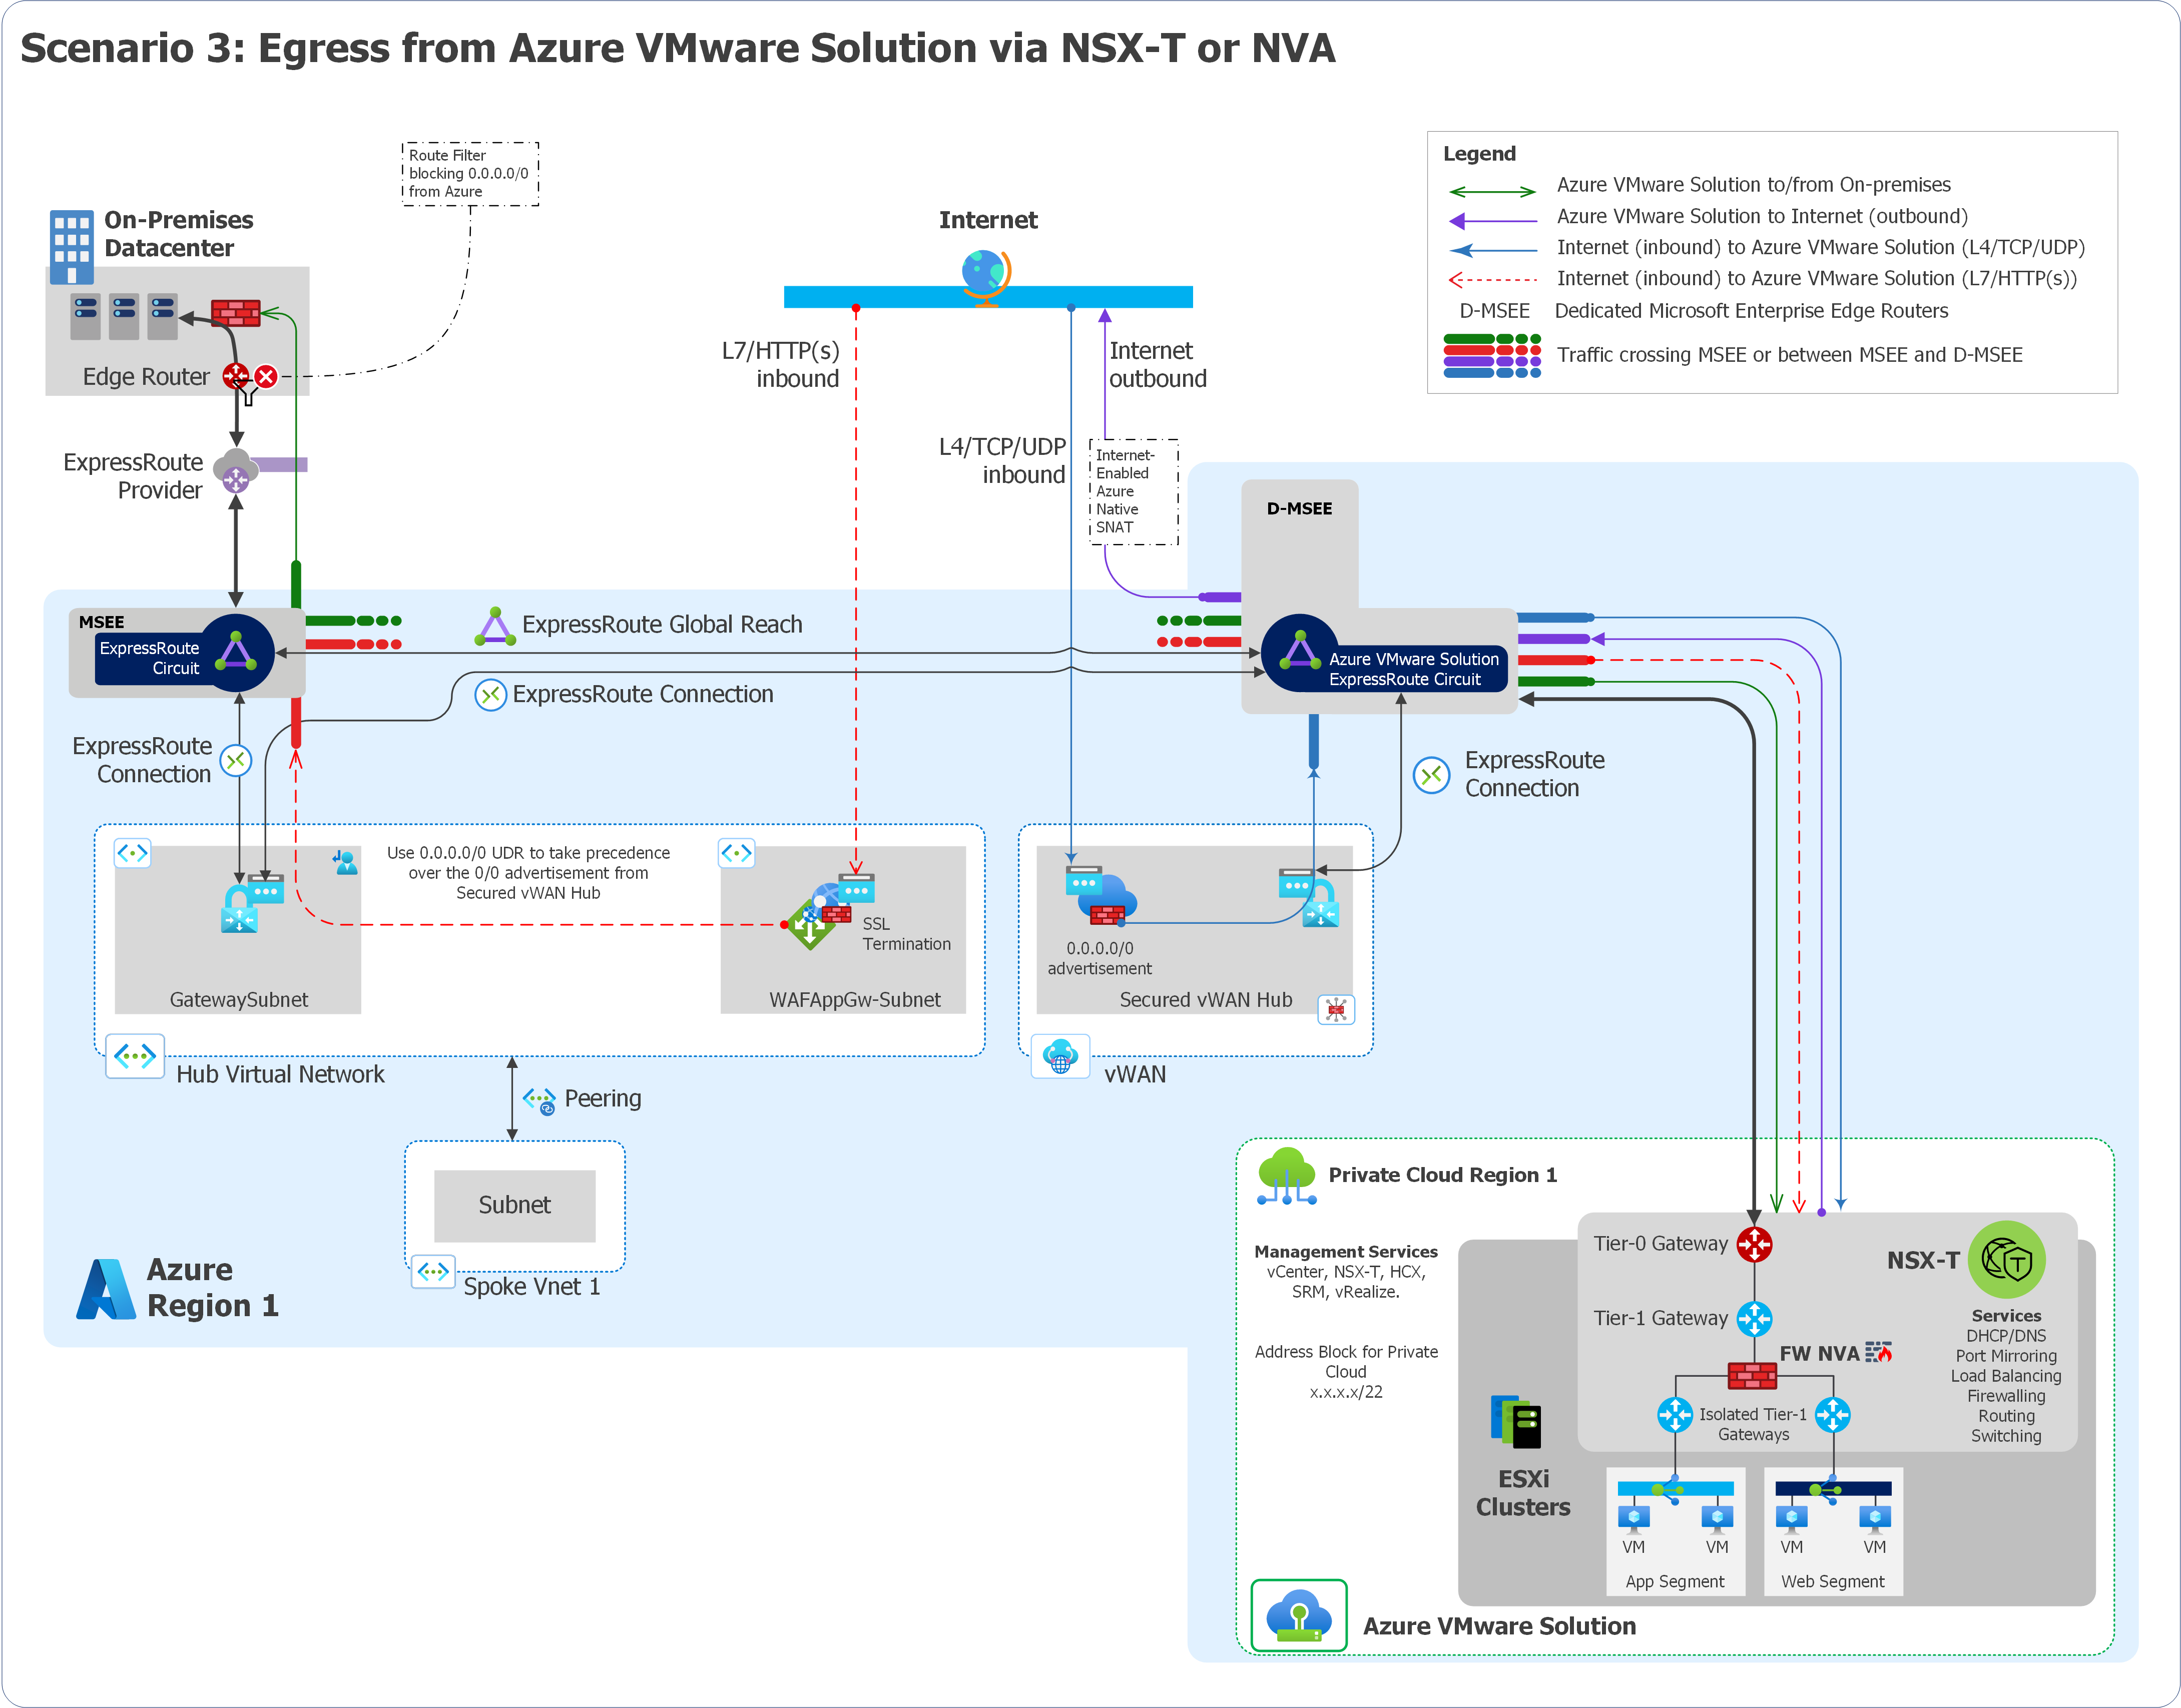 Diagram of scenario 3 with egress from Azure VMware Solution with or without NSX-T Data Center or NVA.